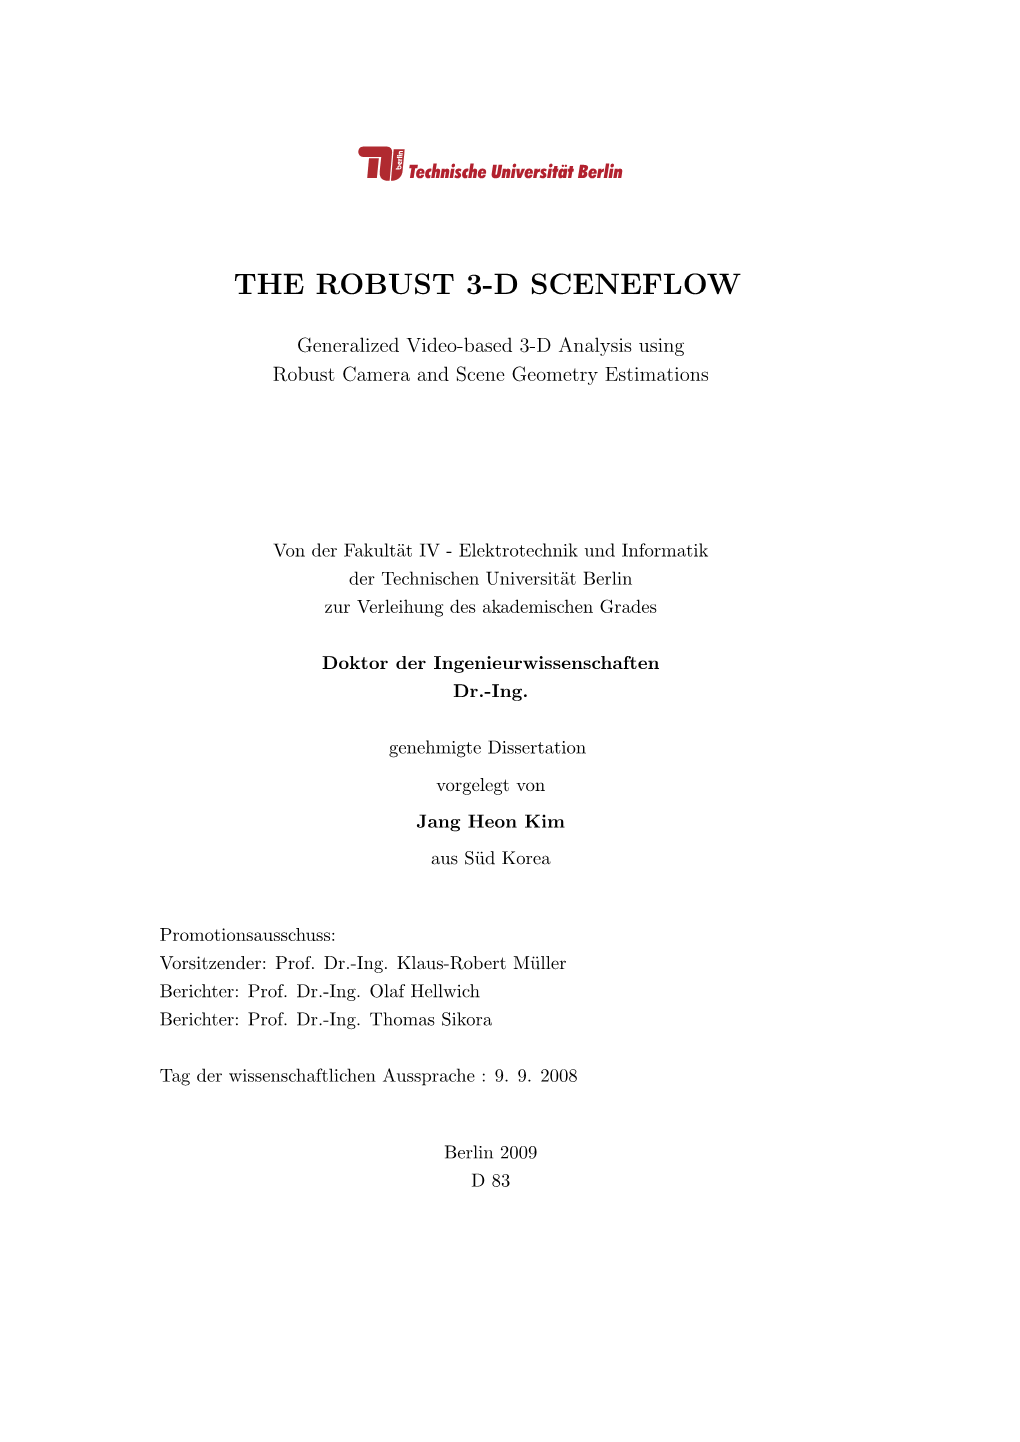 The Robust 3-D Sceneflow